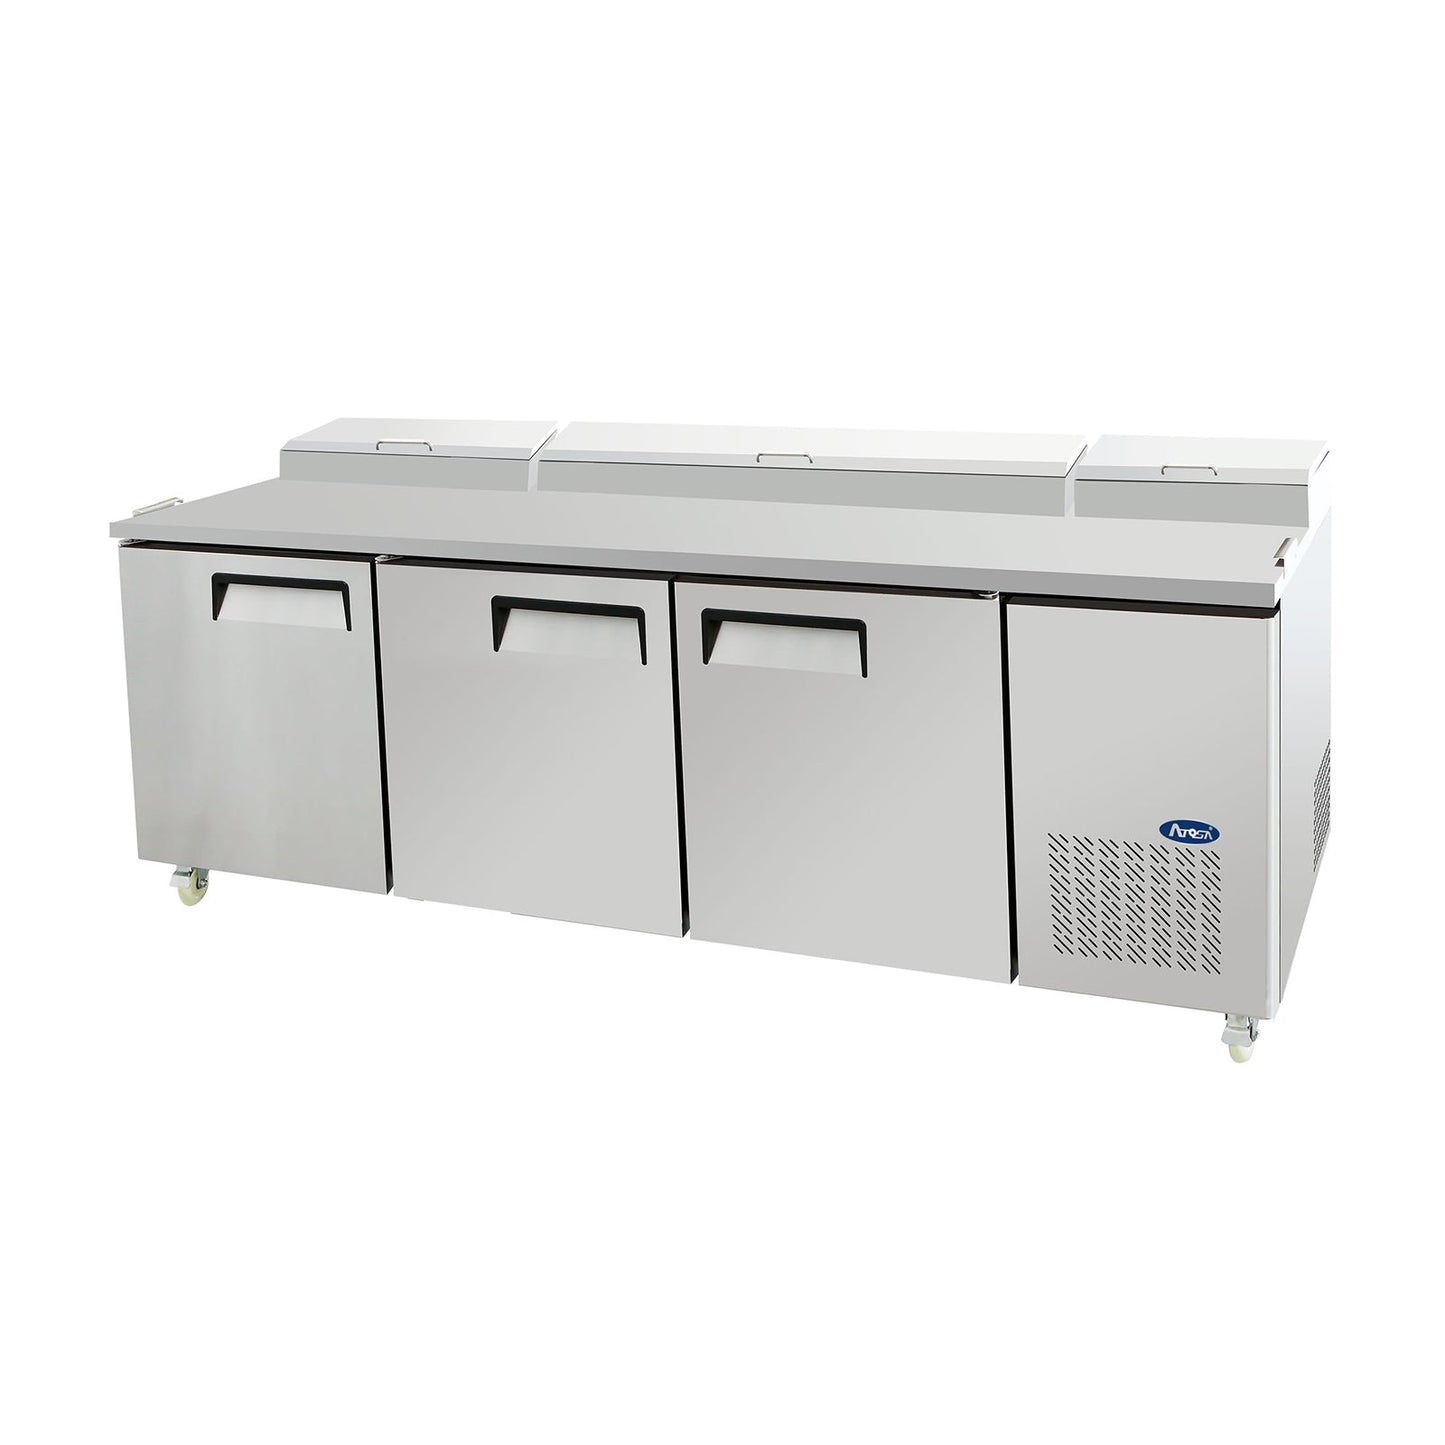 Atosa Three-section Refrigerated Pizza Prep Table, 93"W x 33-1/0"D x 44"H, (MPF8203GR)